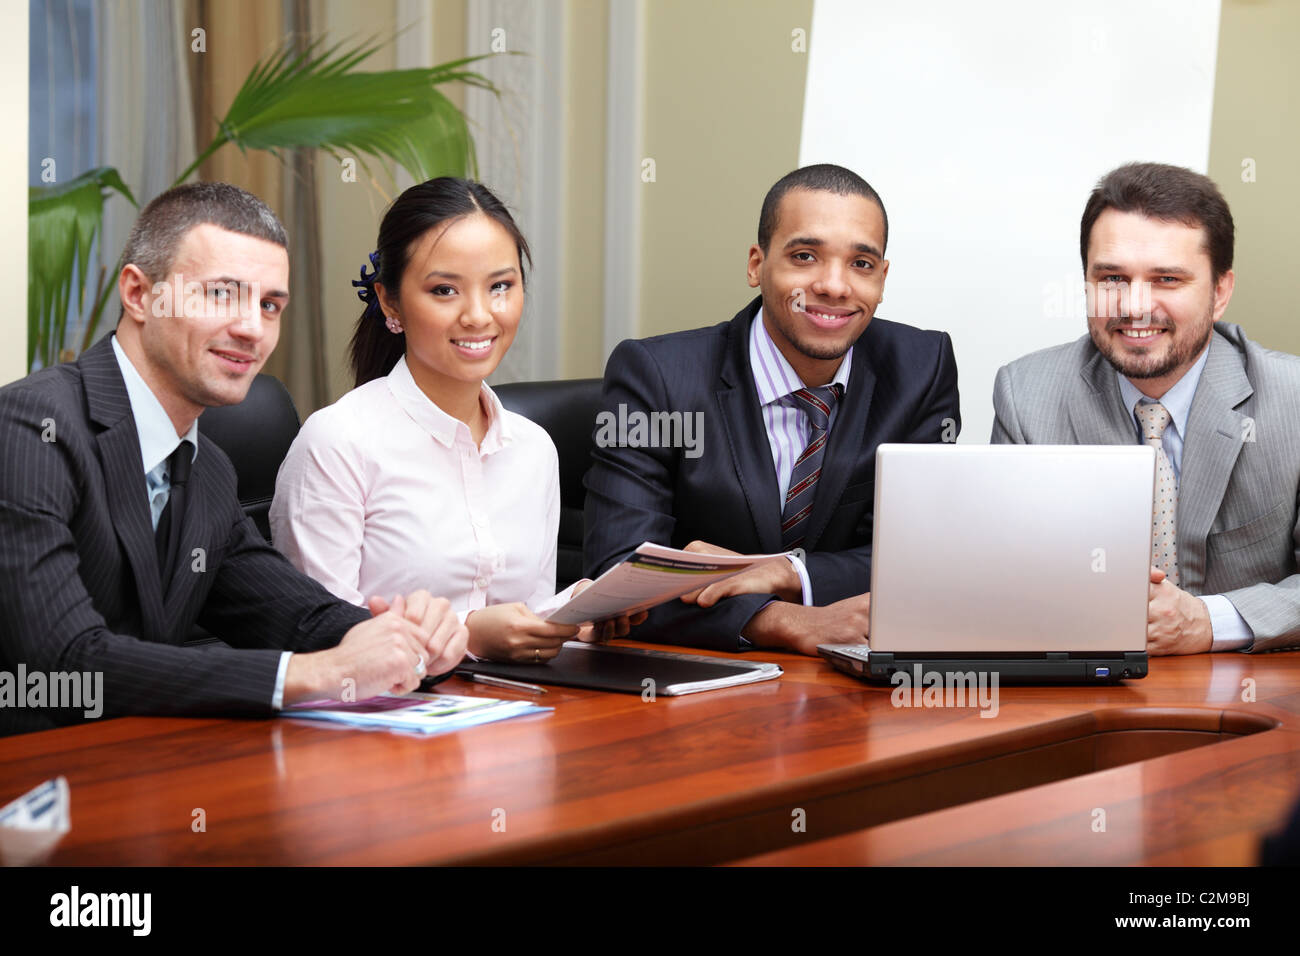 Multi ethnic business team at a meeting. Interacting. Focus on african-american man Stock Photo